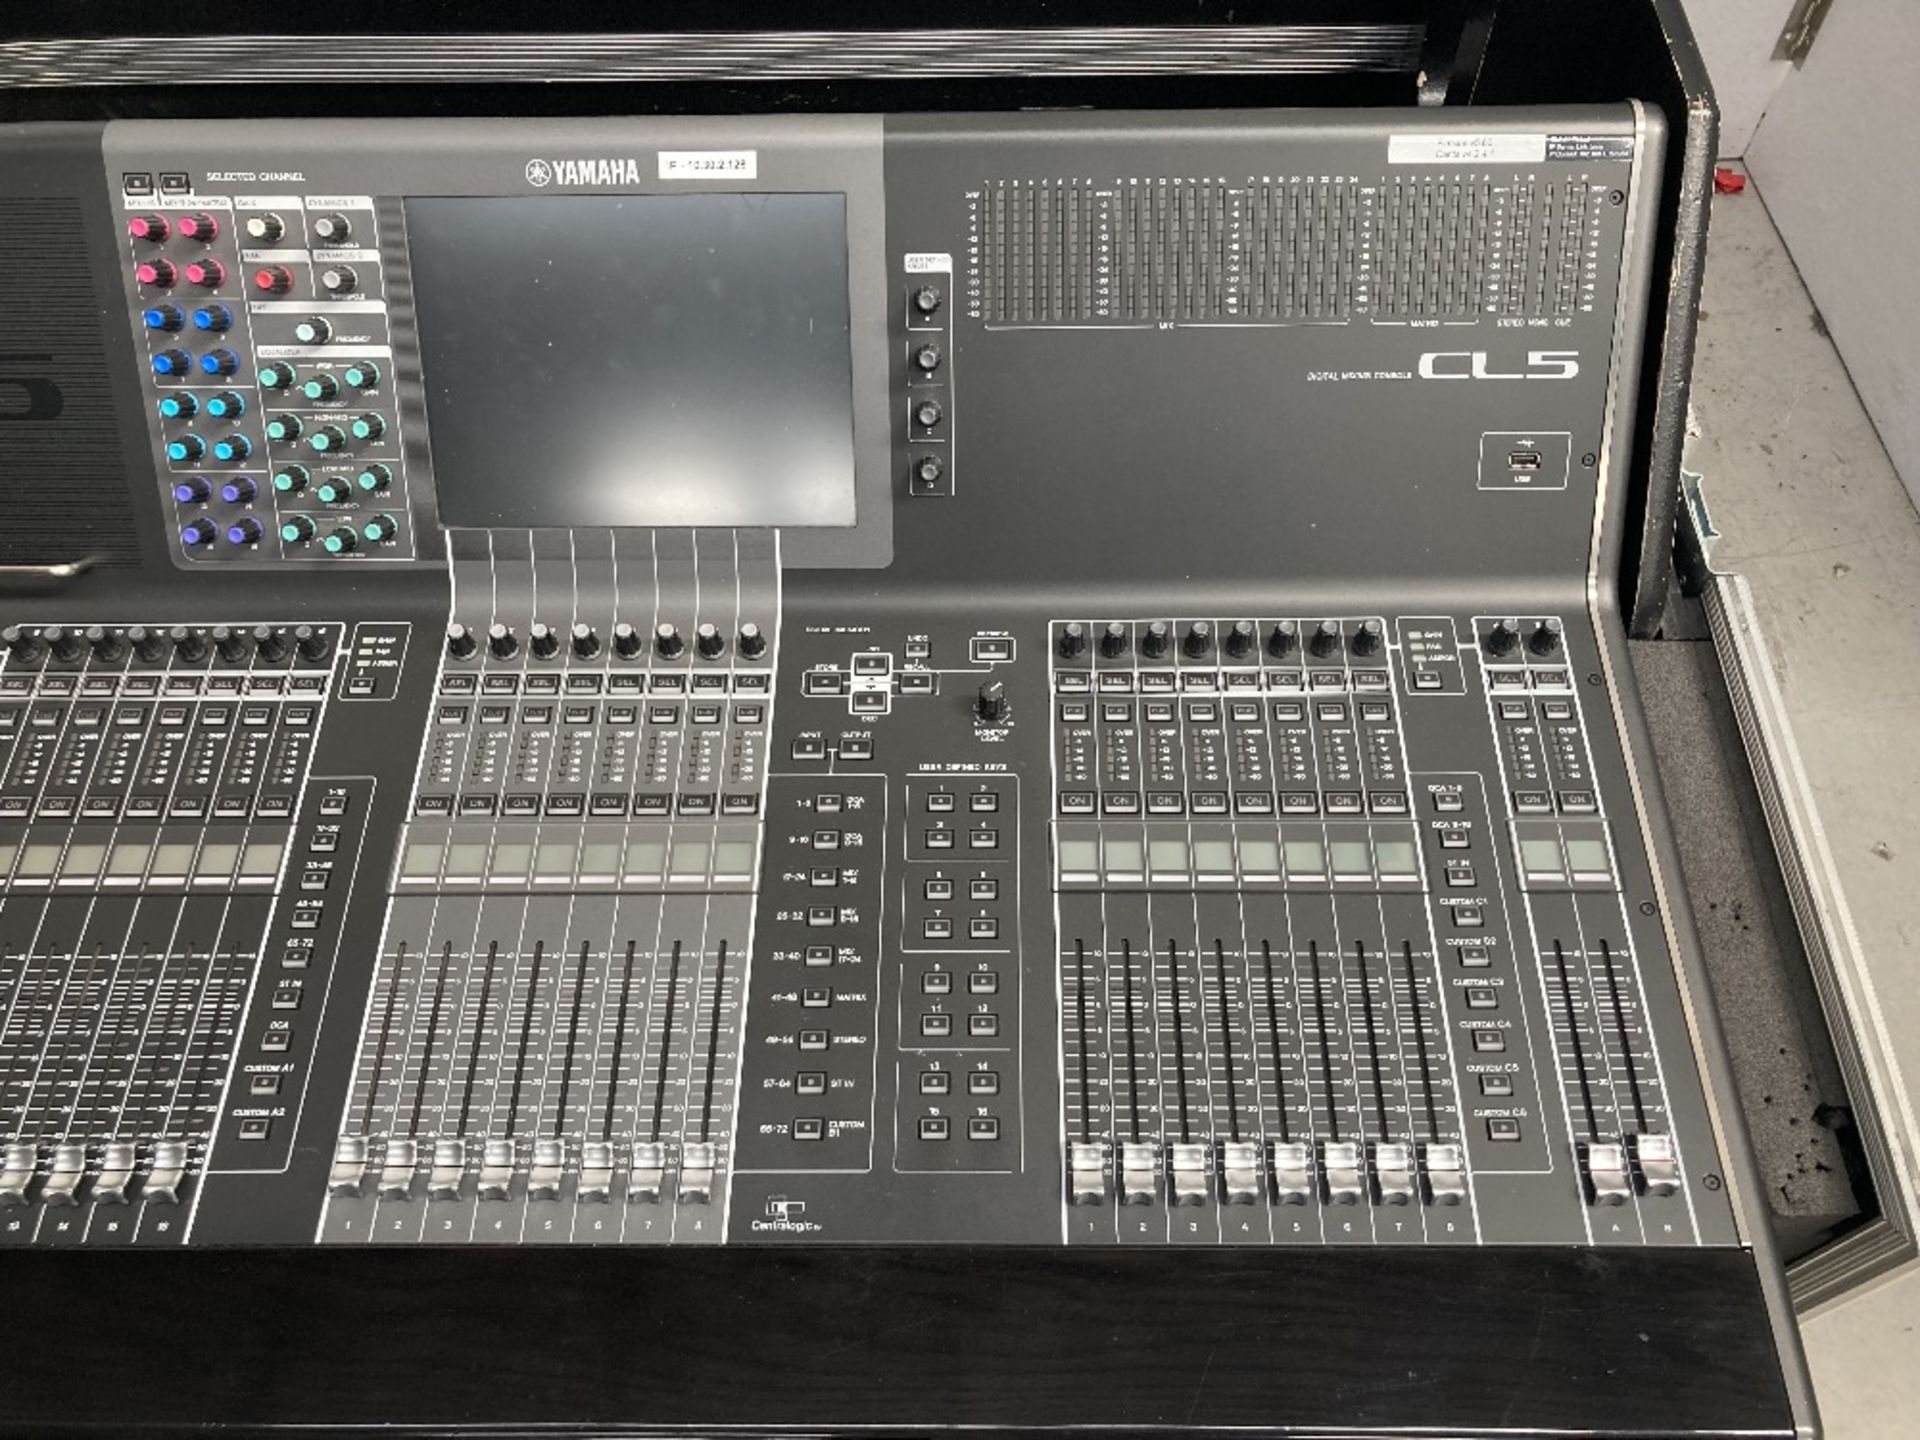 Yamaha CL5 Digital Mixing Console & Heavy Duty Mobile Flight Case - Image 2 of 14